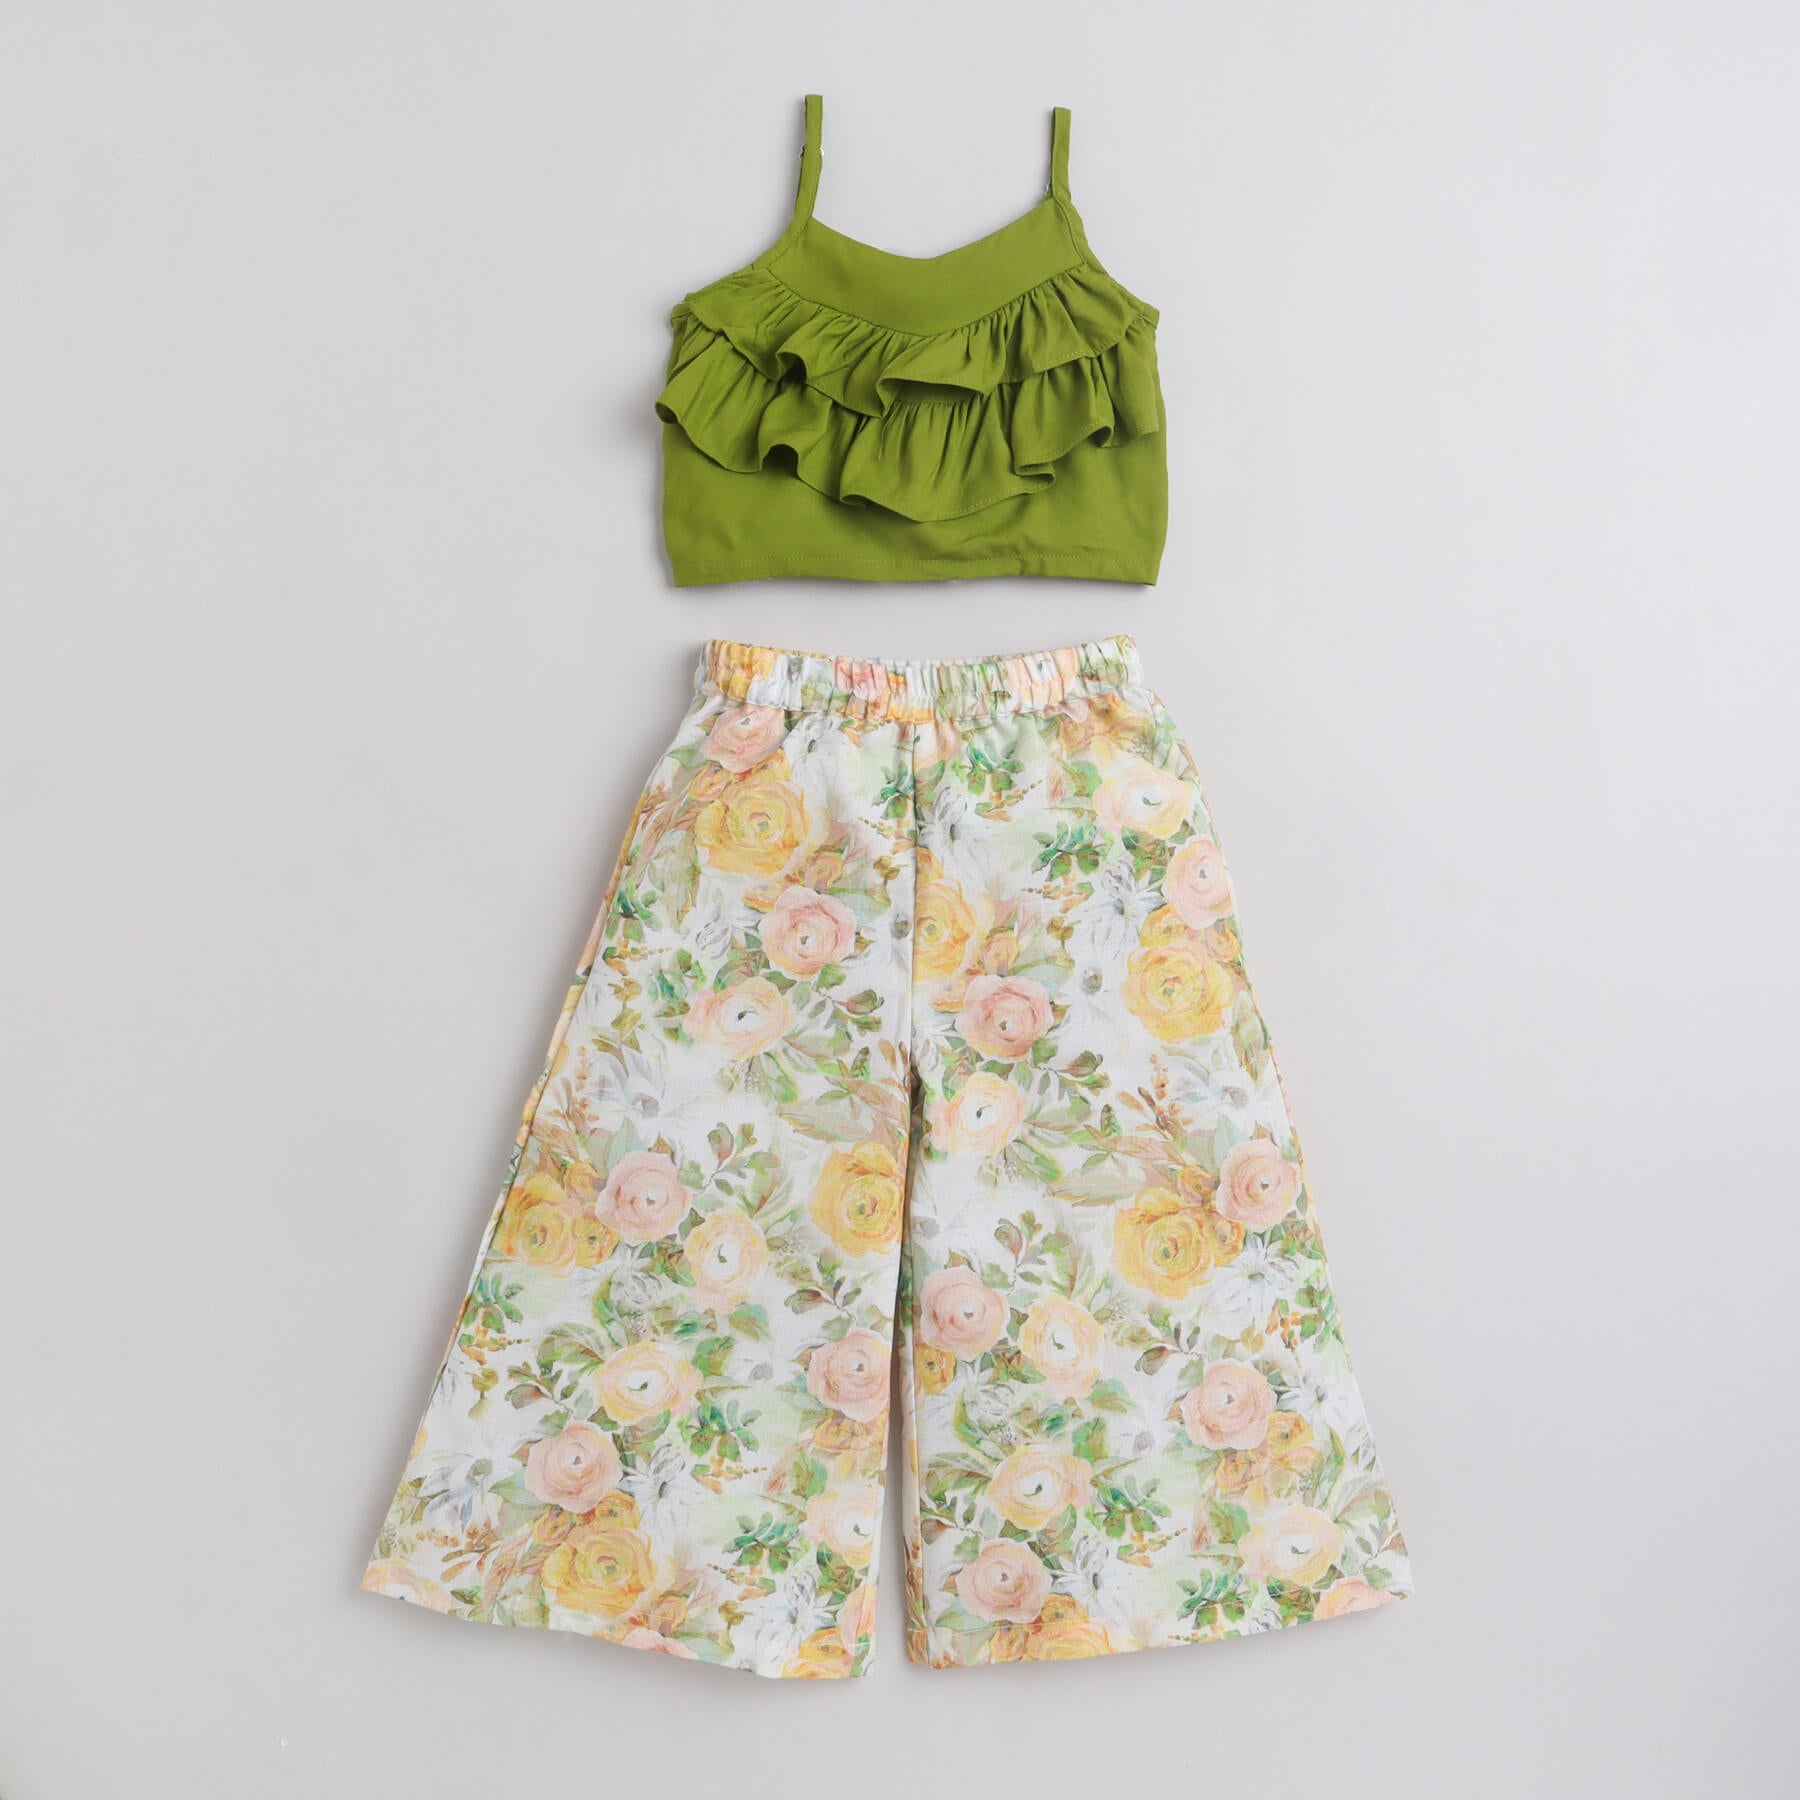 Taffykids 100% cotton Ruffle detail ethnic crop top and printed pant set-Green